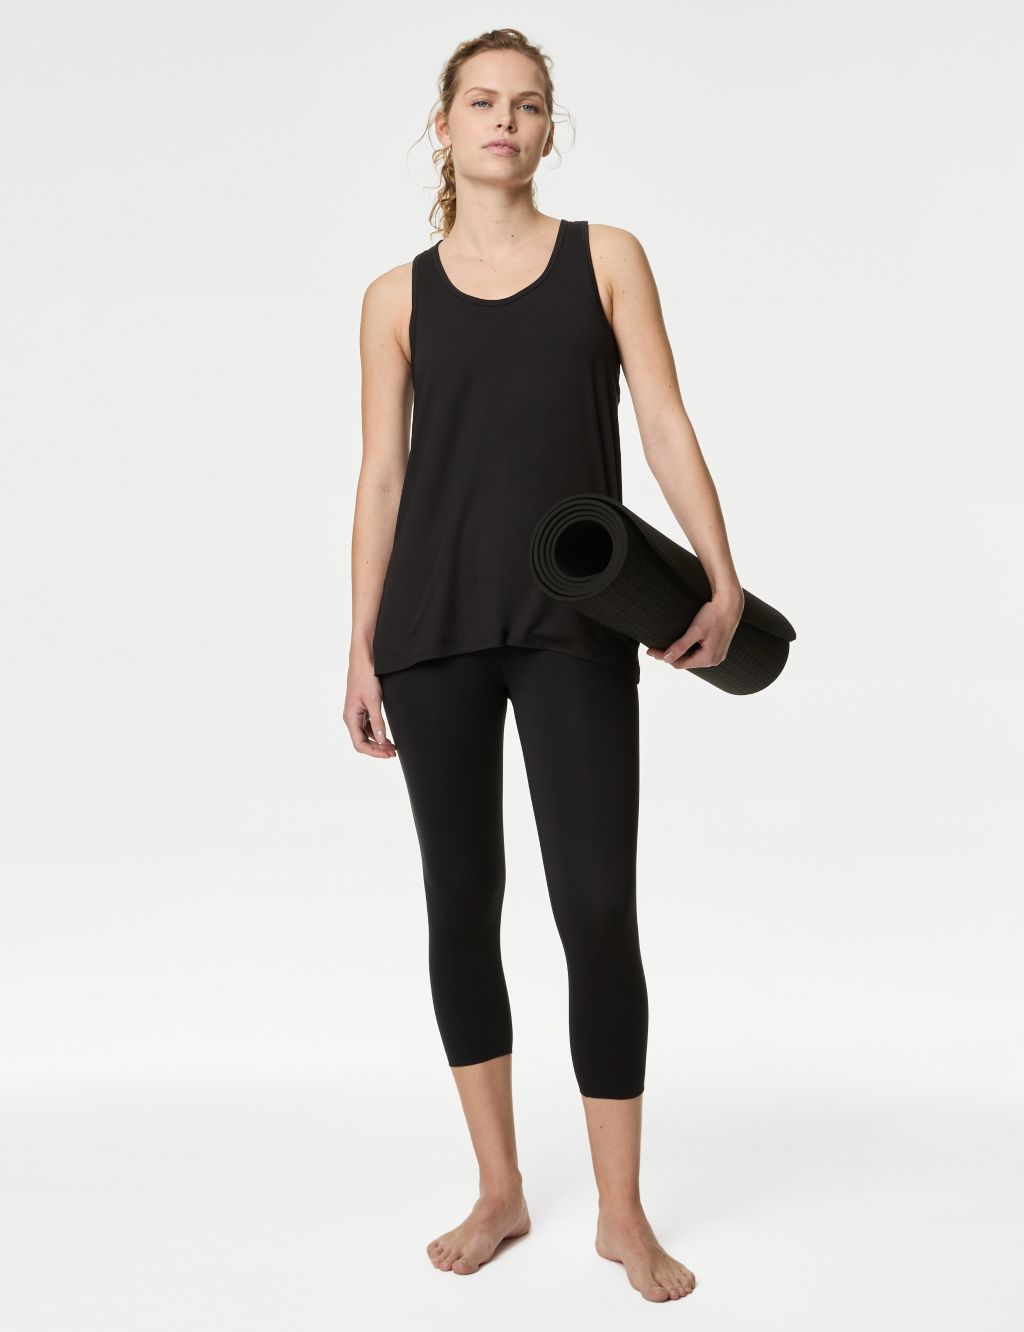 Scoop Neck Relaxed Sleeveless Yoga Top image 2